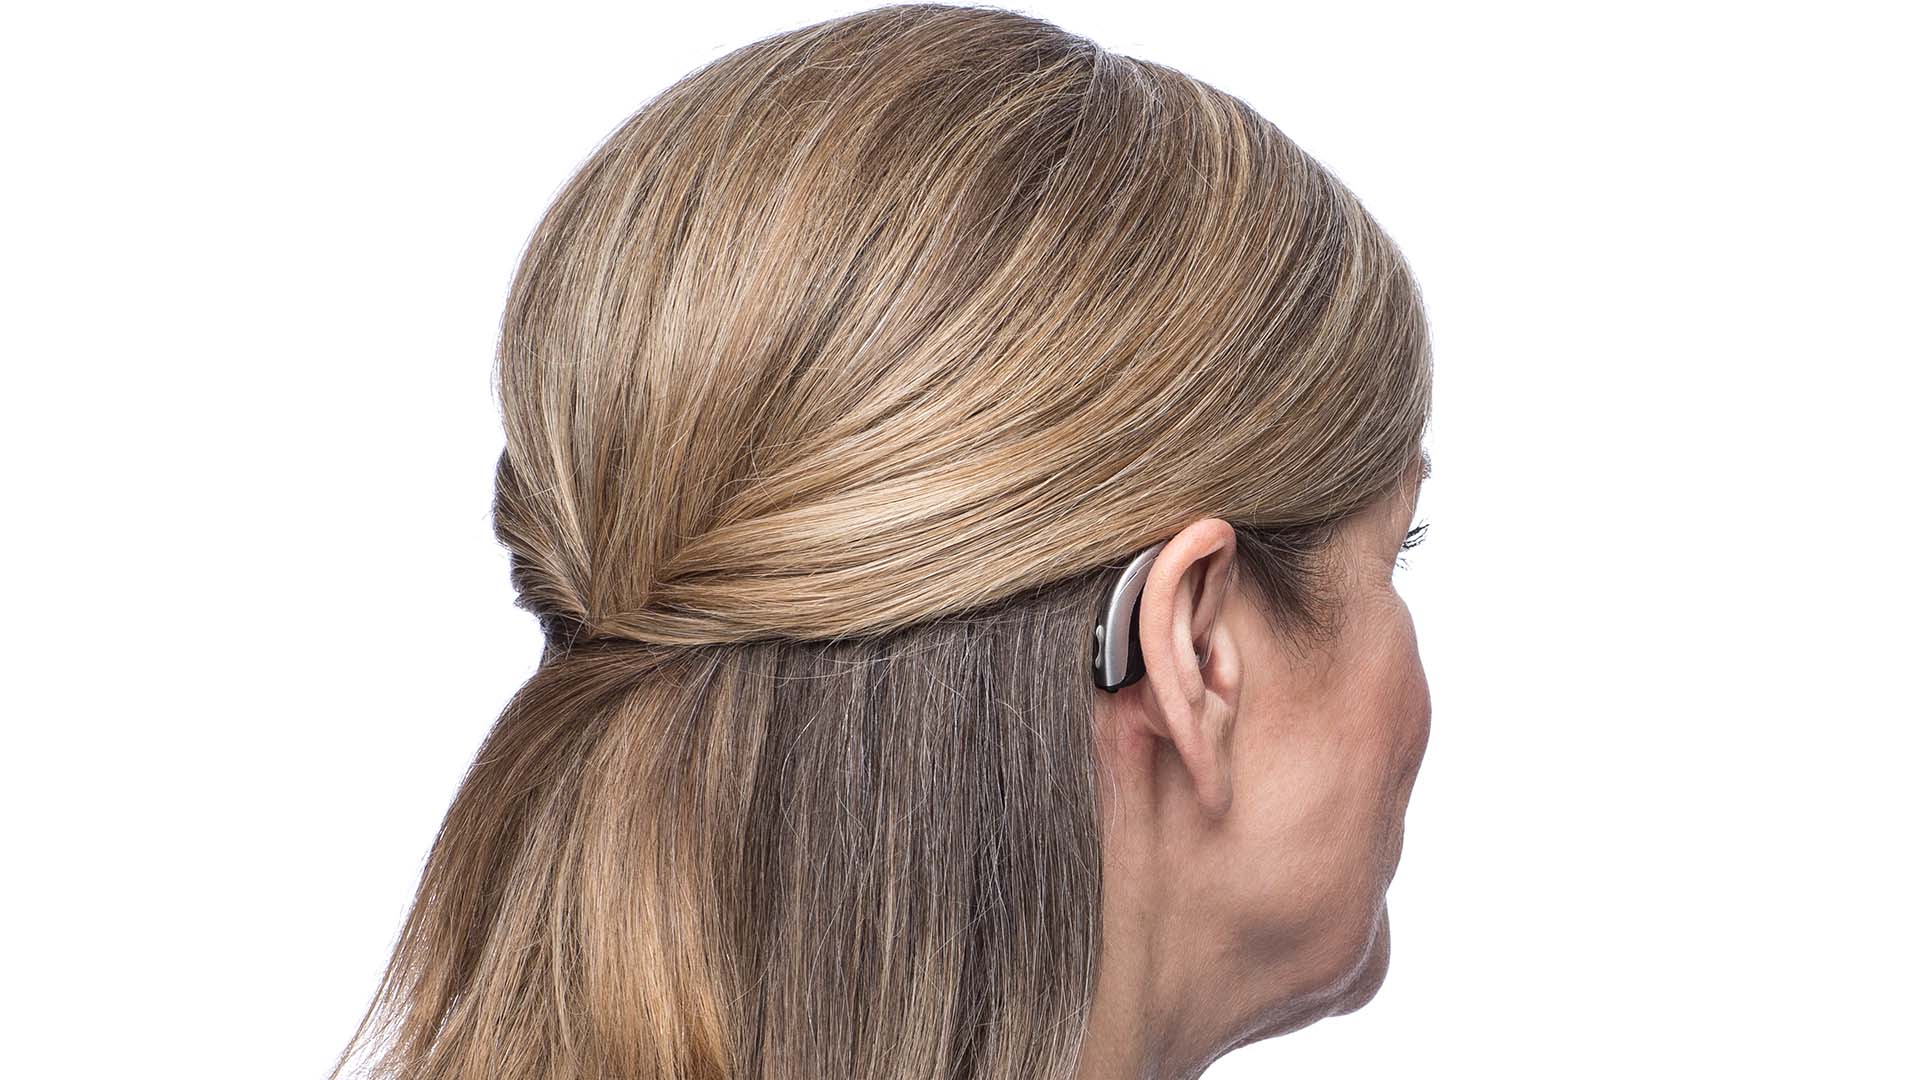 Woman with hearing aid behind-the-ear